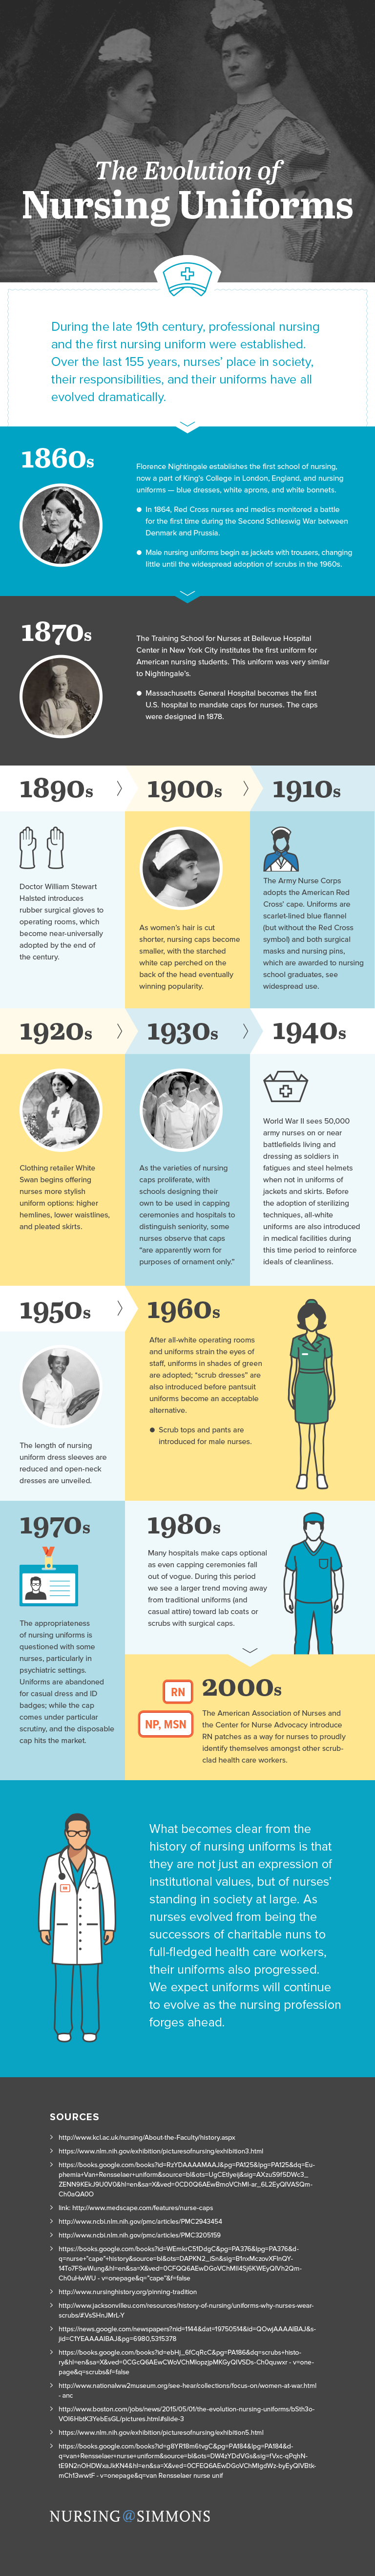 Infographic showing the evolution of nursing uniforms over time.